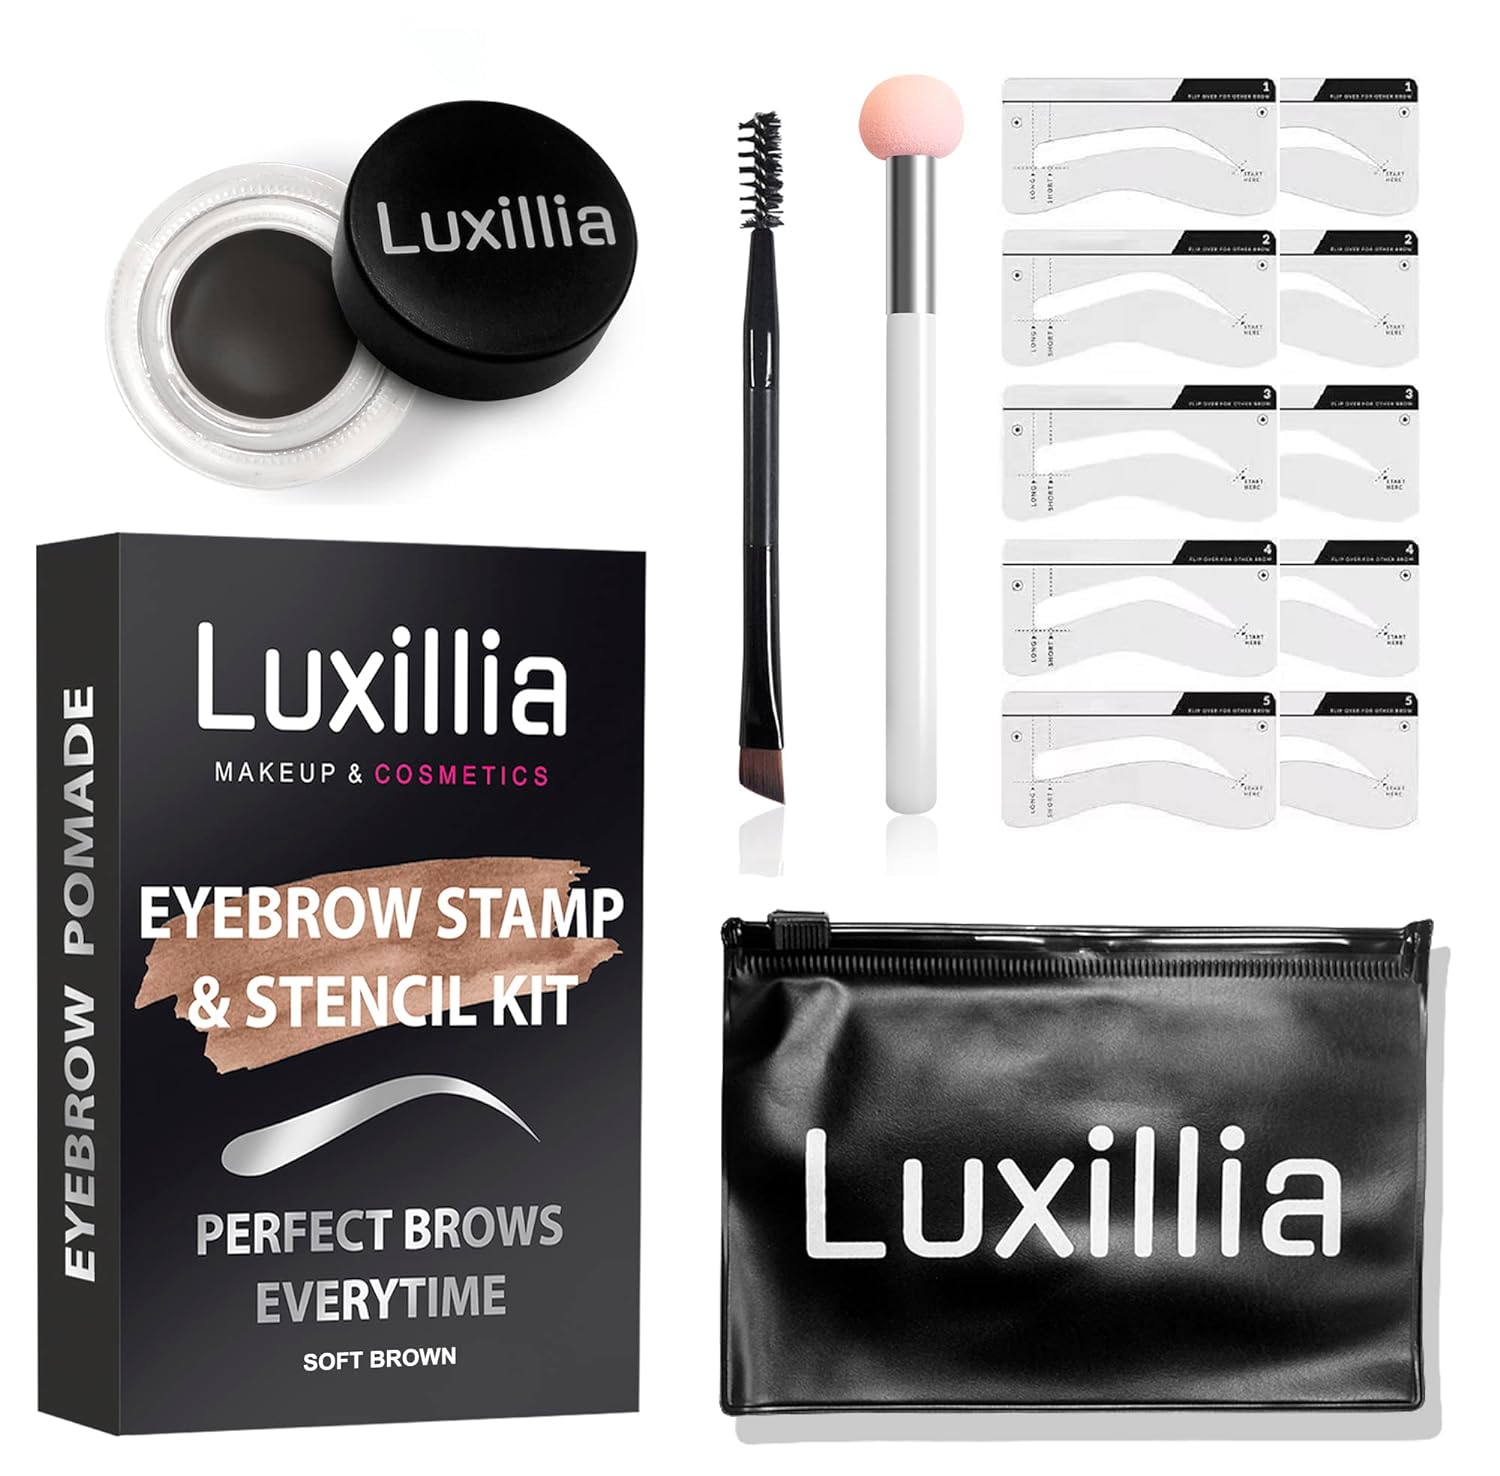 Luxillia Eyebrow Stamp Stencil Kit Pomade, Perfect Instant Brows Every Time, Adjustable for all Eyebrow Shapes, Waterproof and Sweatproof, Reusable & Super Easy To Use (NEARLY BLACK)